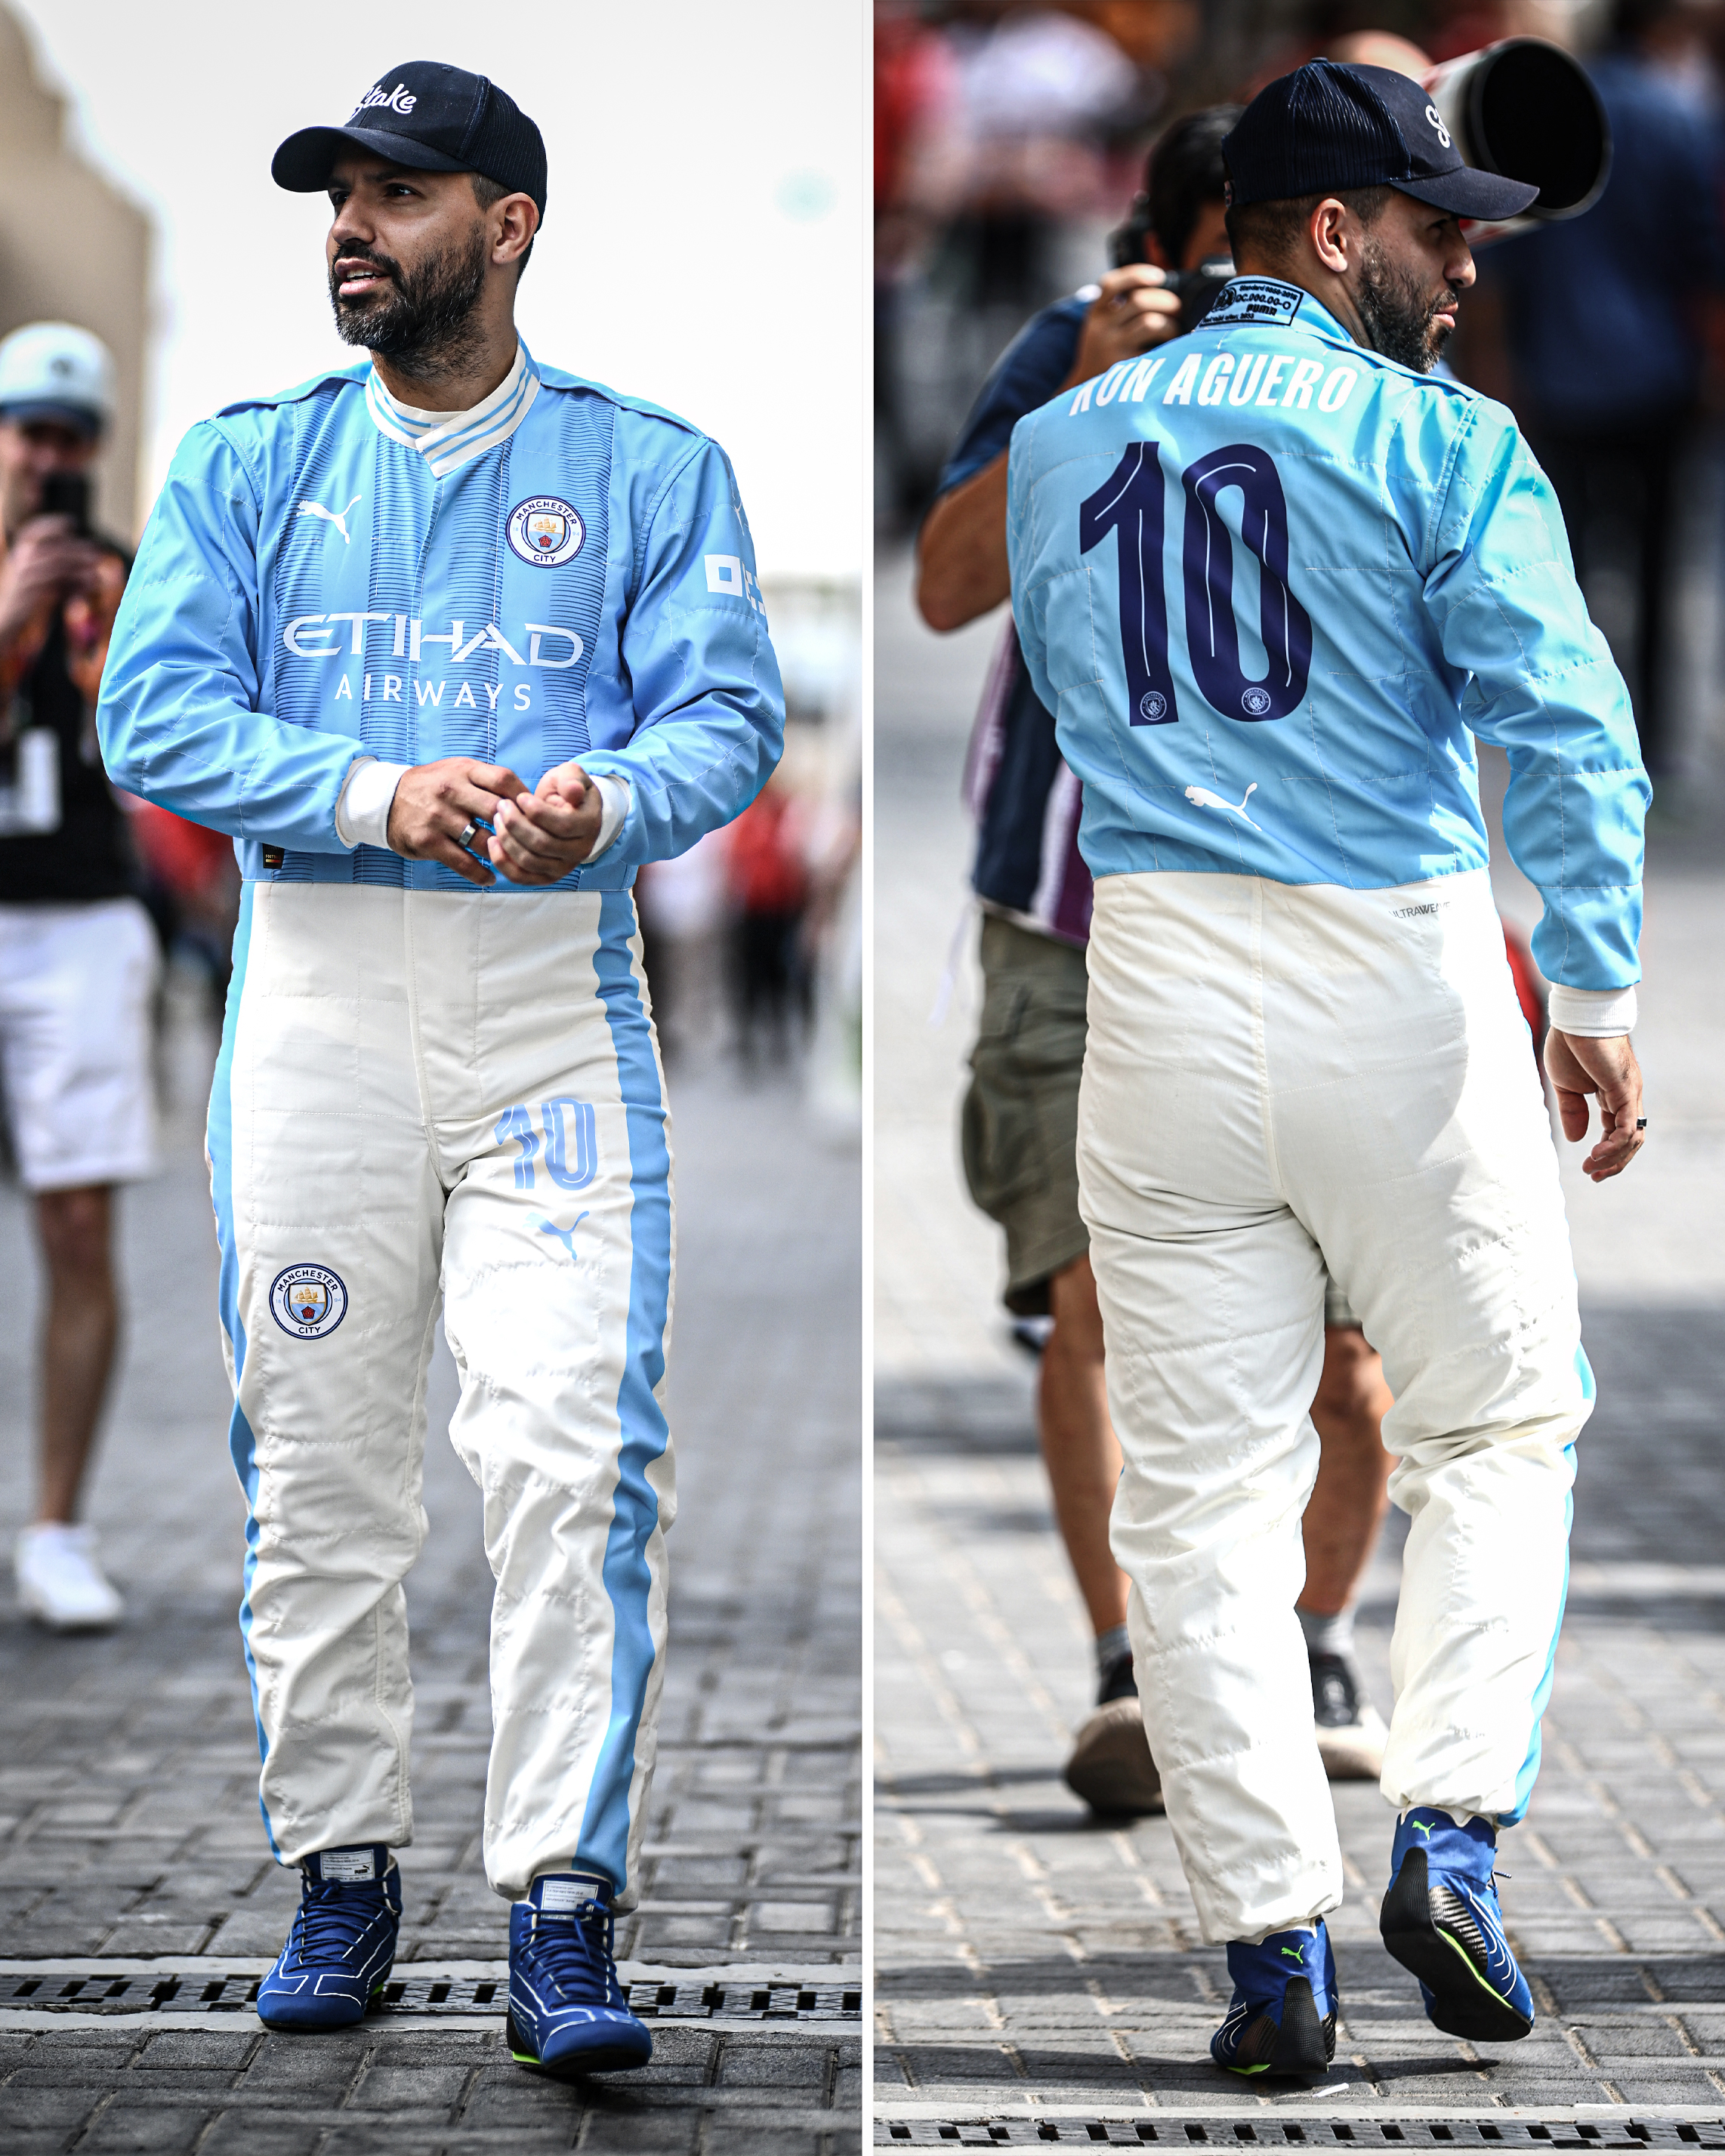 ESPN F1 on X: "Former Man City striker Sergio Aguero is wearing a custom  race suit for the Abu Dhabi GP this weekend 👏⚽️ https://t.co/9F37KNRXjC" /  X